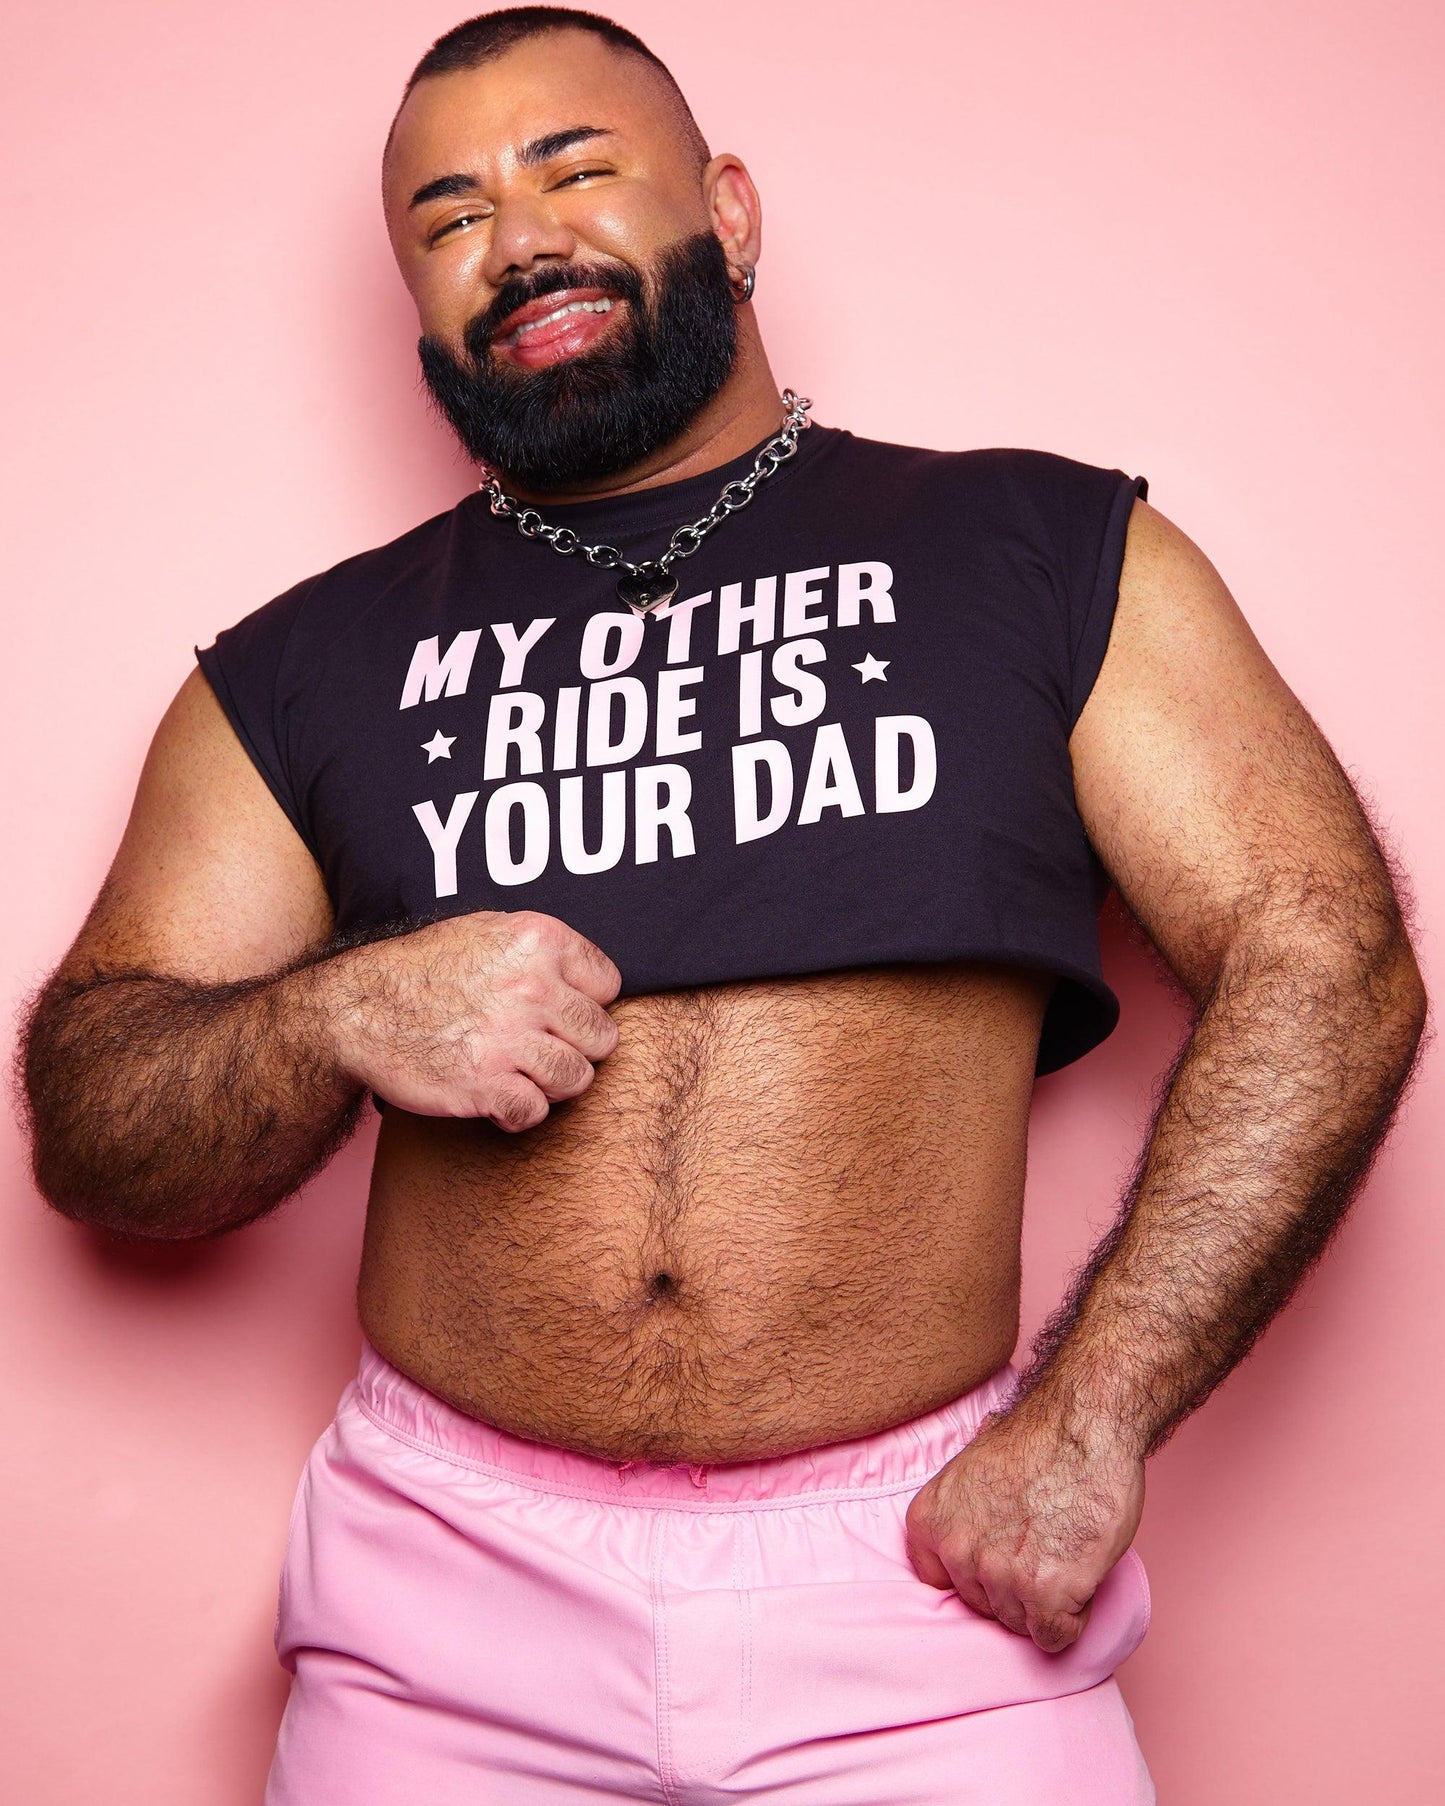 My other ride is your dad, pink on black - Sleeveless crop-top.